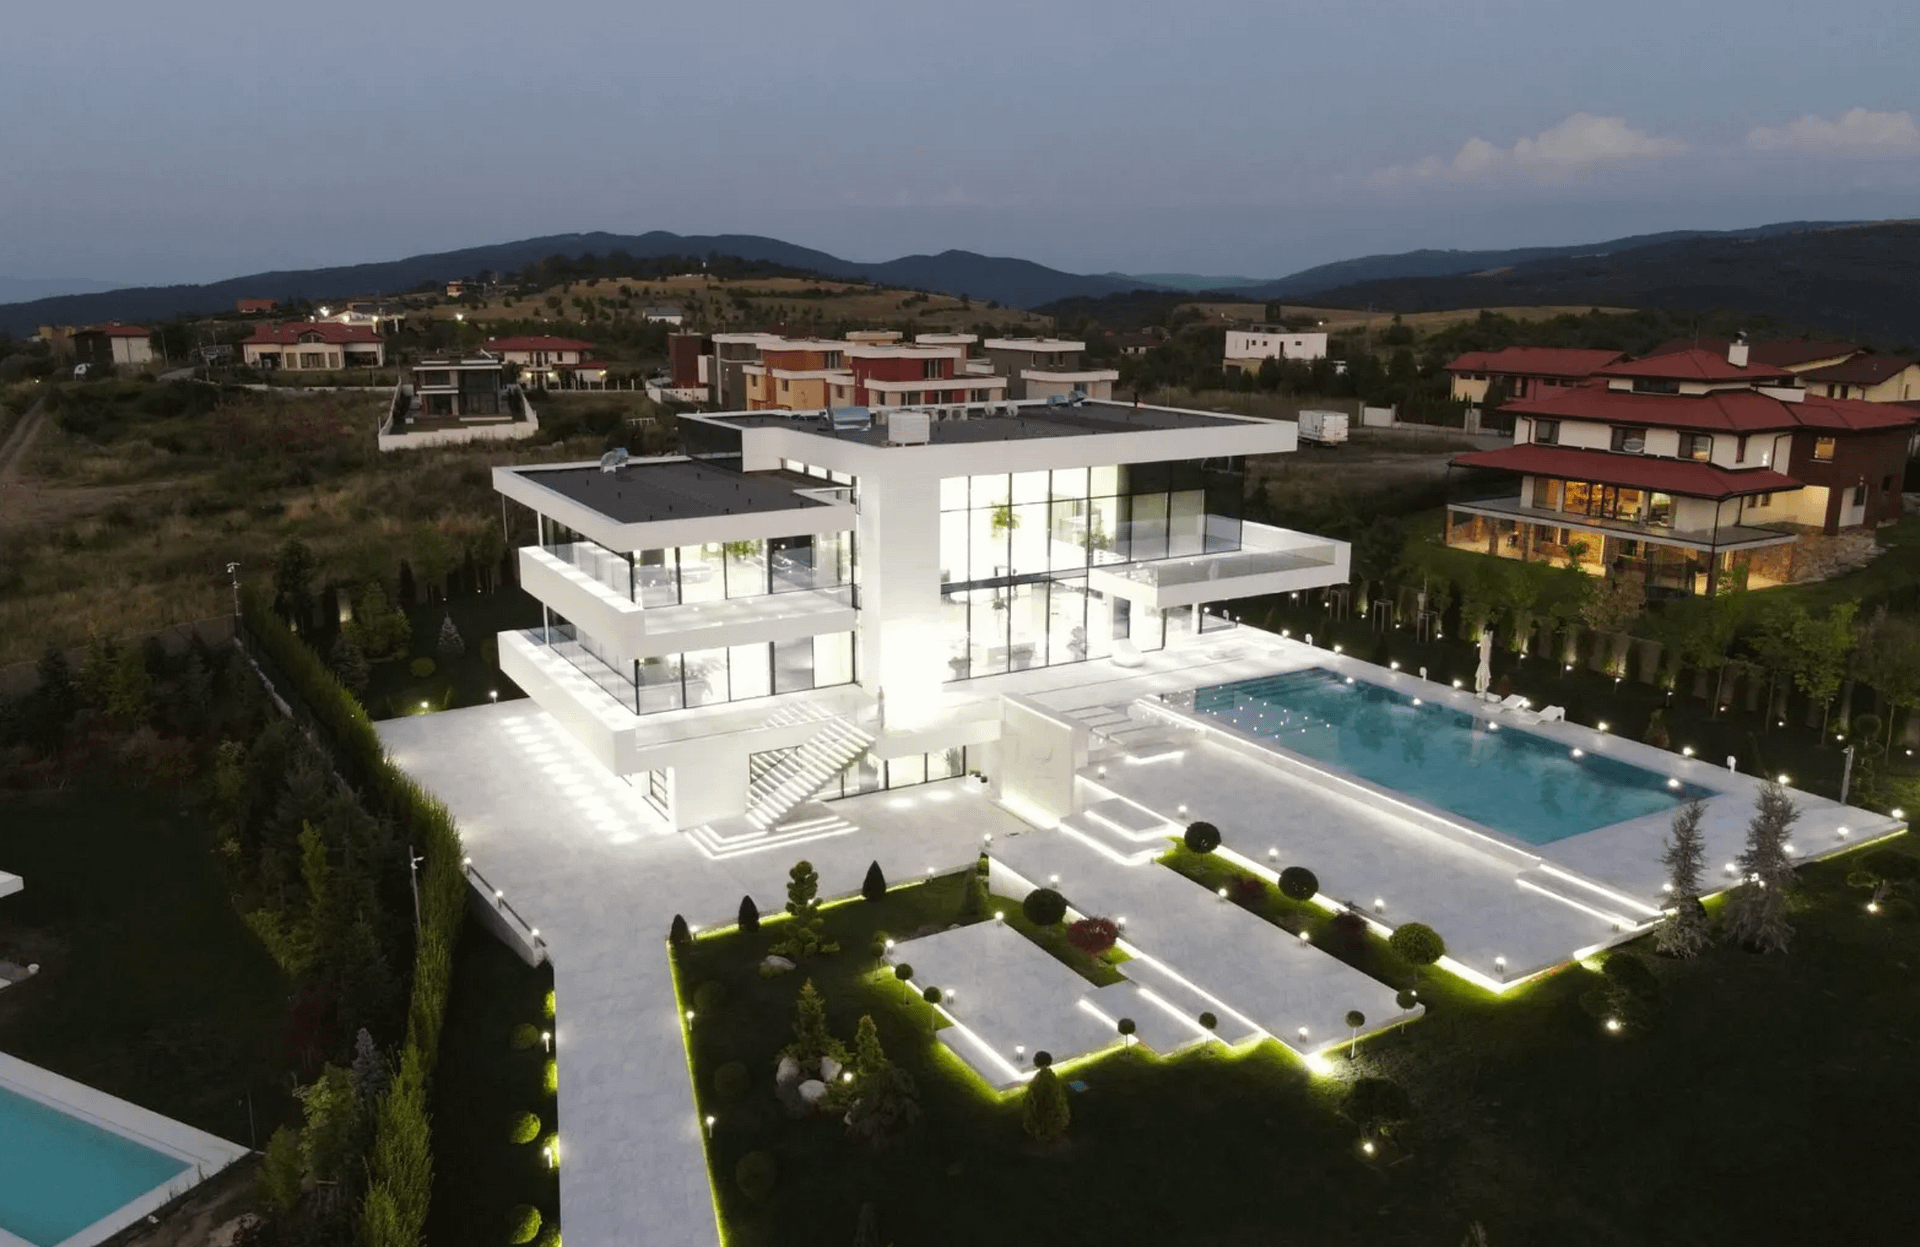 Ultra Modern Home For Sale In Bulgaria (PHOTOS)